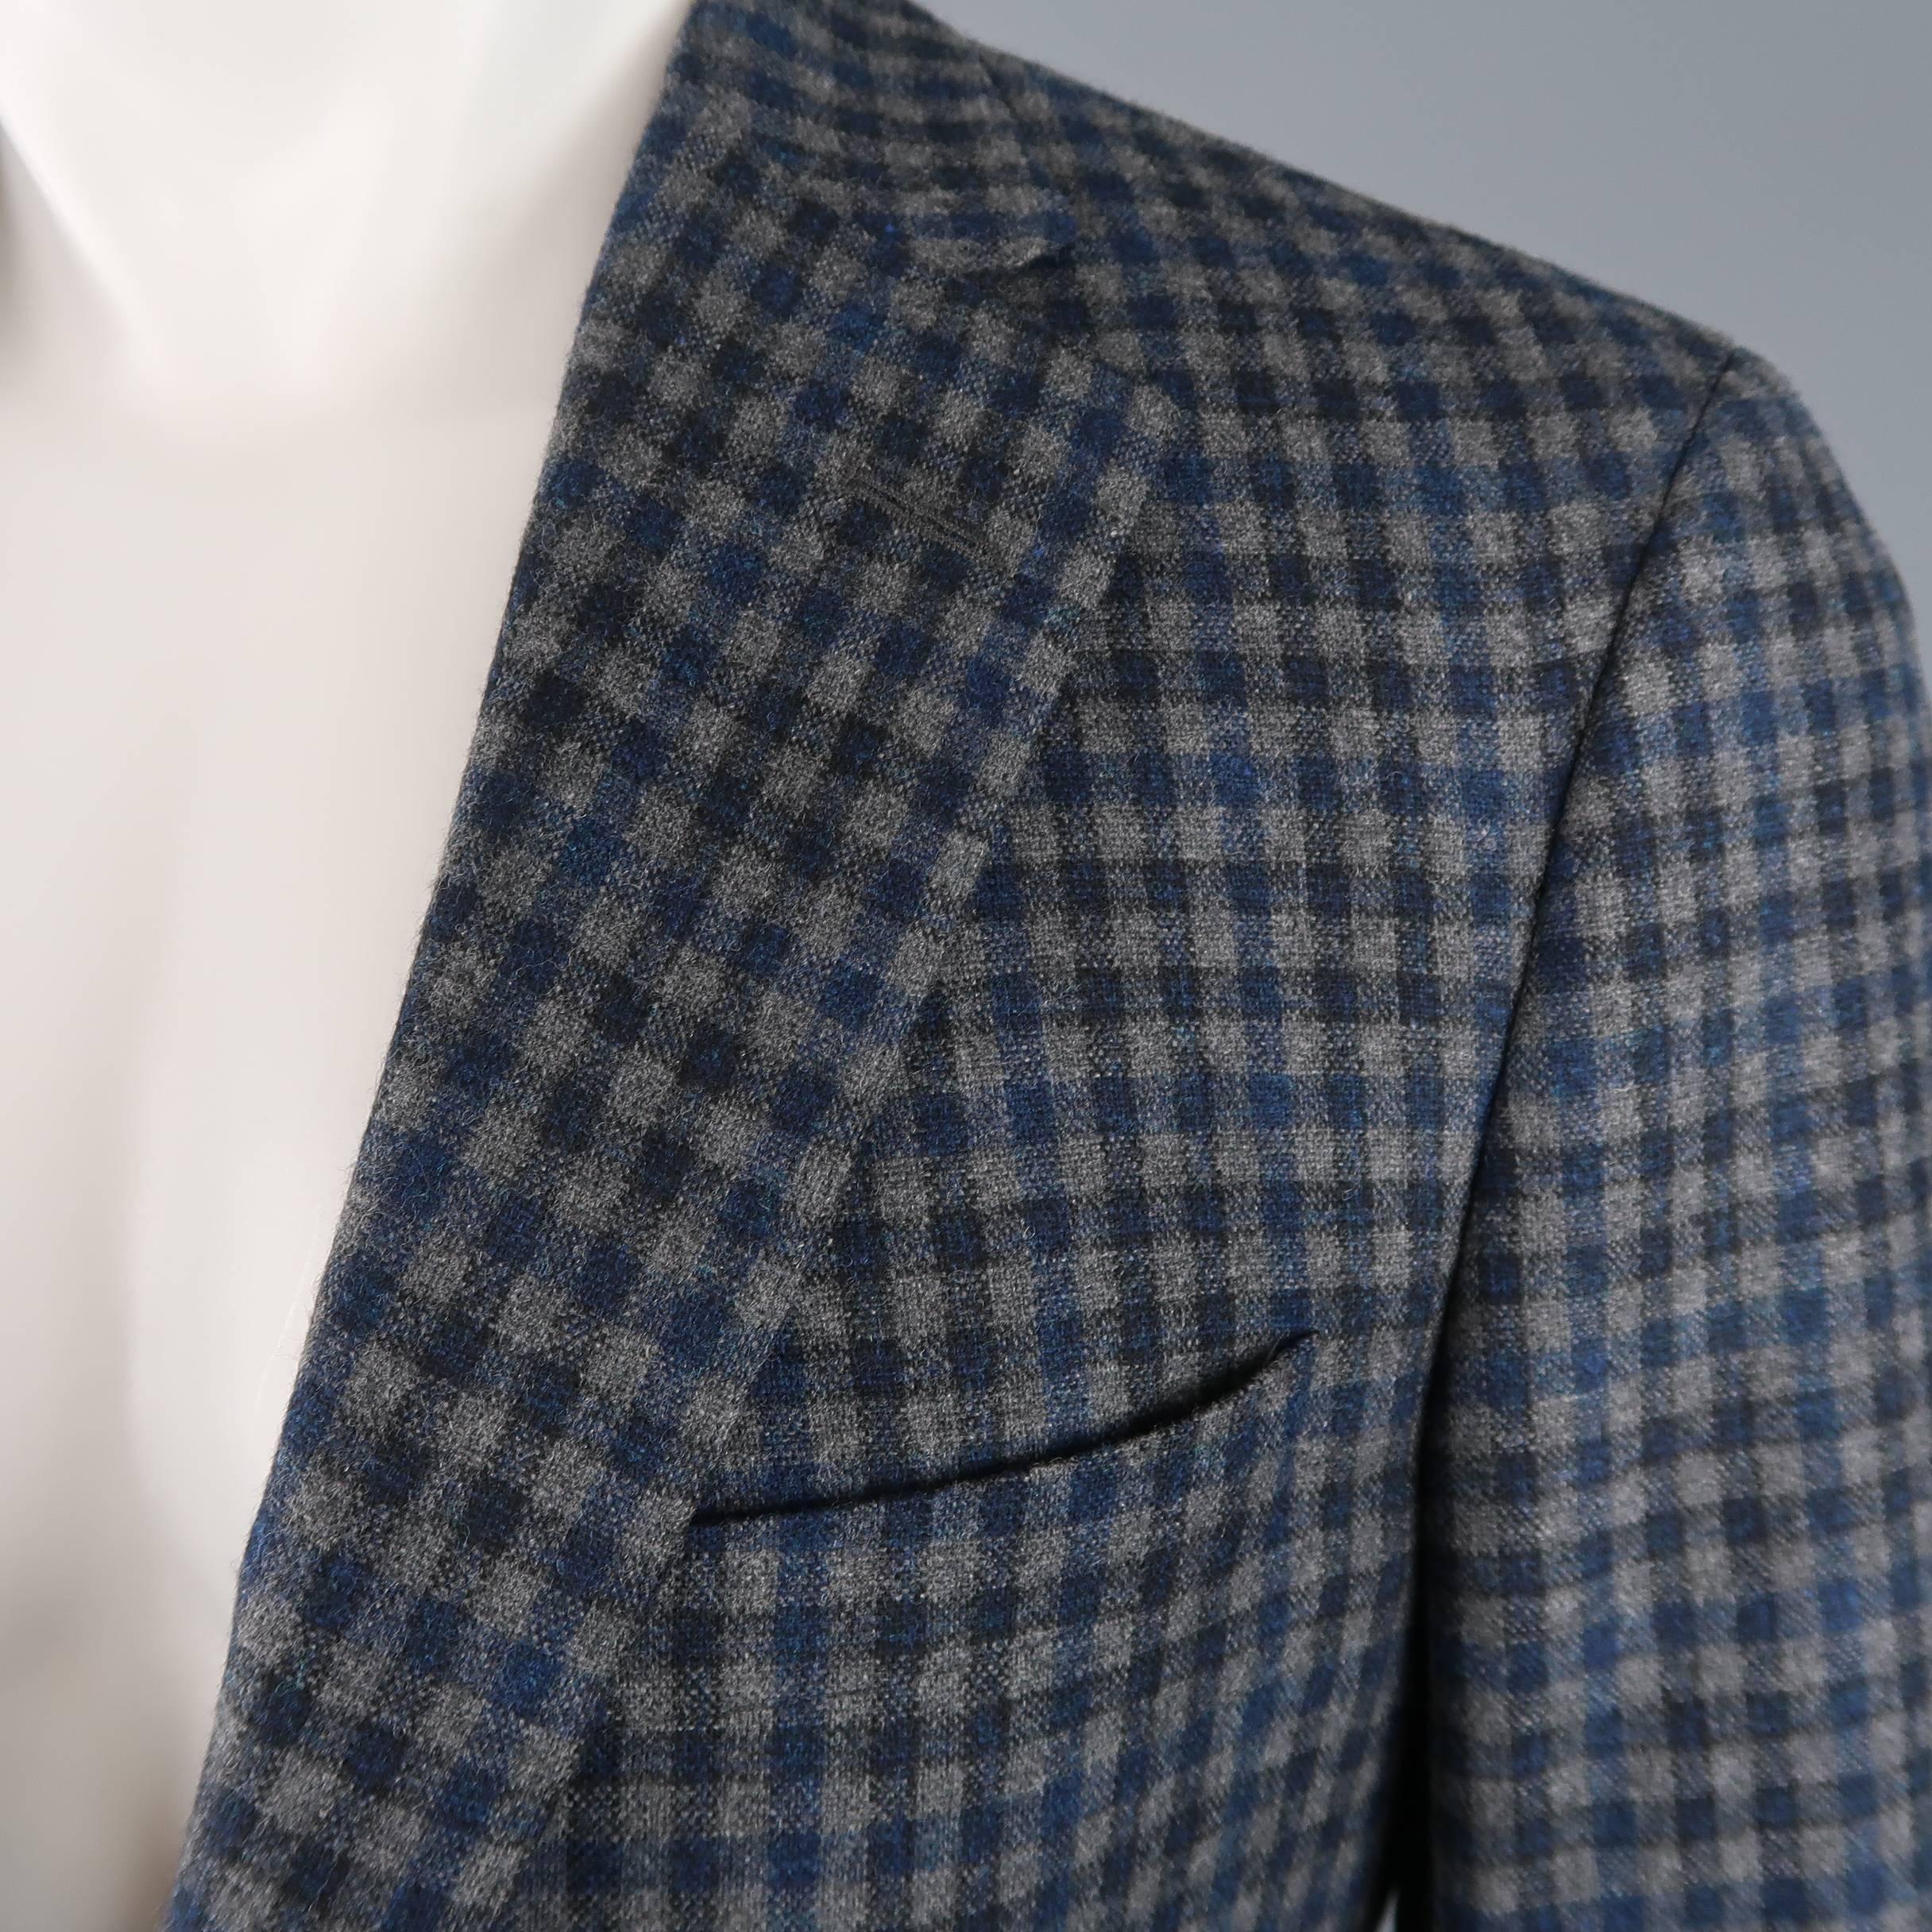 SAMUELSOHN sport coat comes in blue and gray plaid wool cashmere flannel with a notch lapel, two button closure, functional button cuffs, and half liner. Made in Canada.
 
Excellent Pre-Owned Condition.
Marked: 40 R
 
Measurements:
 
Shoulder: 17